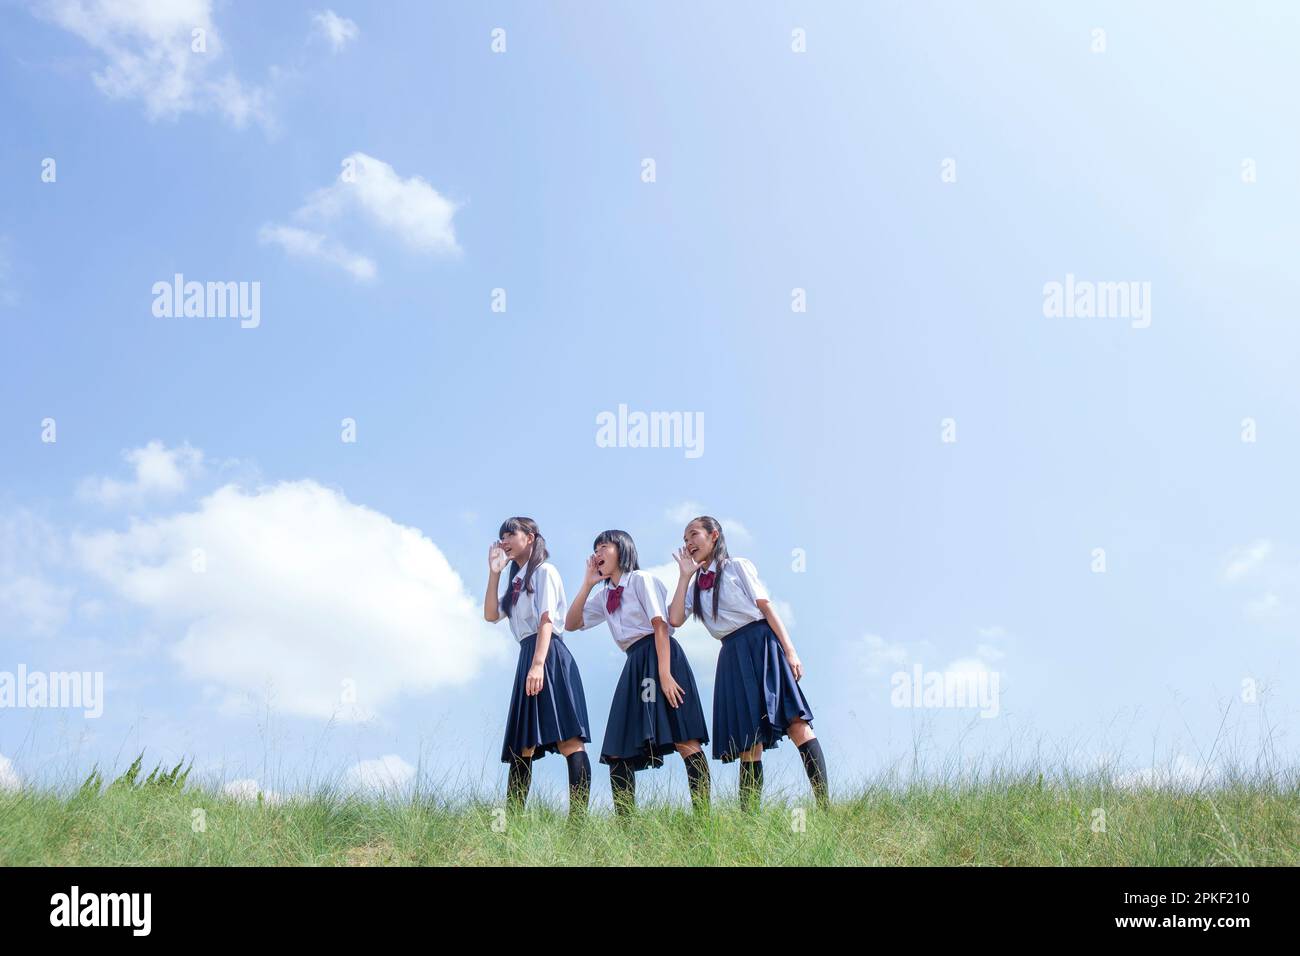 Junior High School Students Standing on the Bank Stock Photo